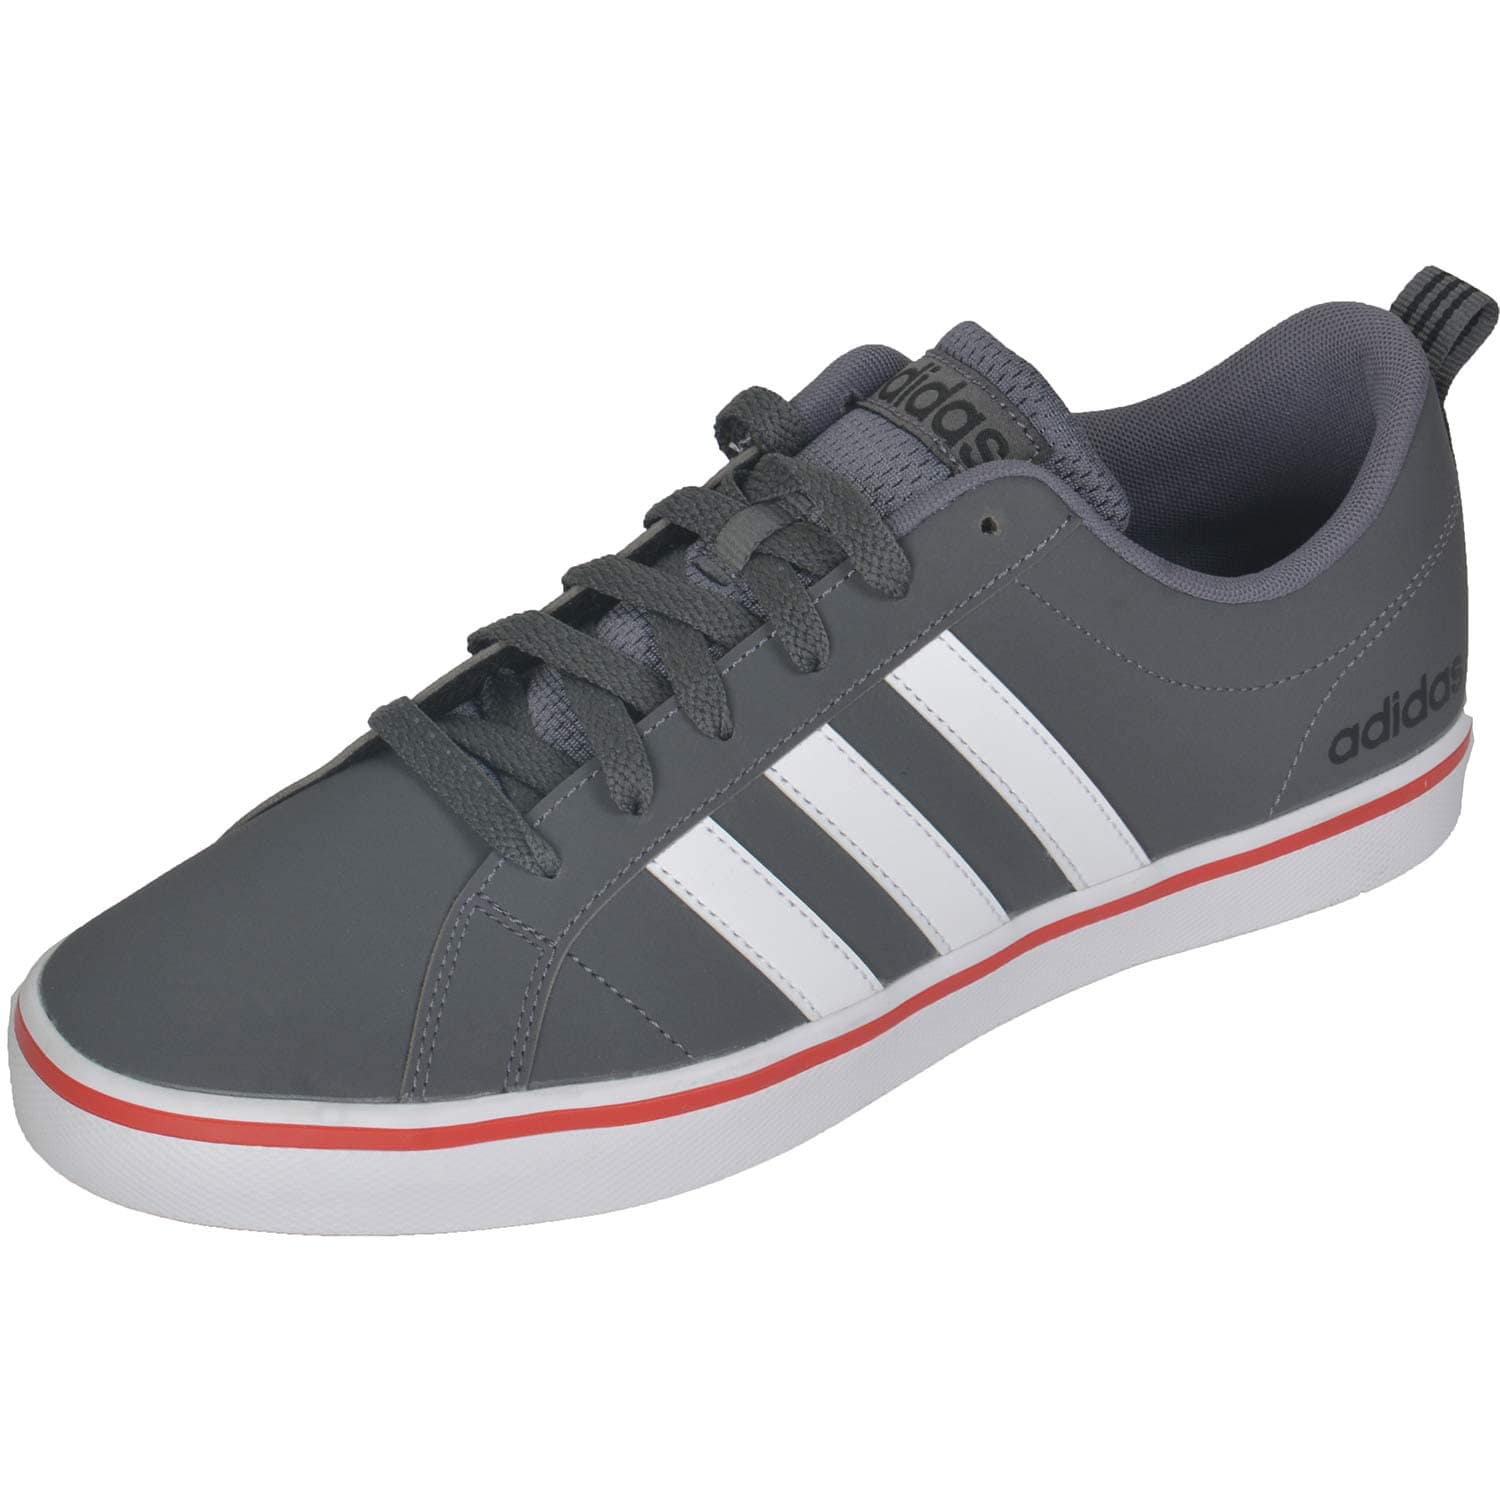 Adidas neo Men Leather Sneakers